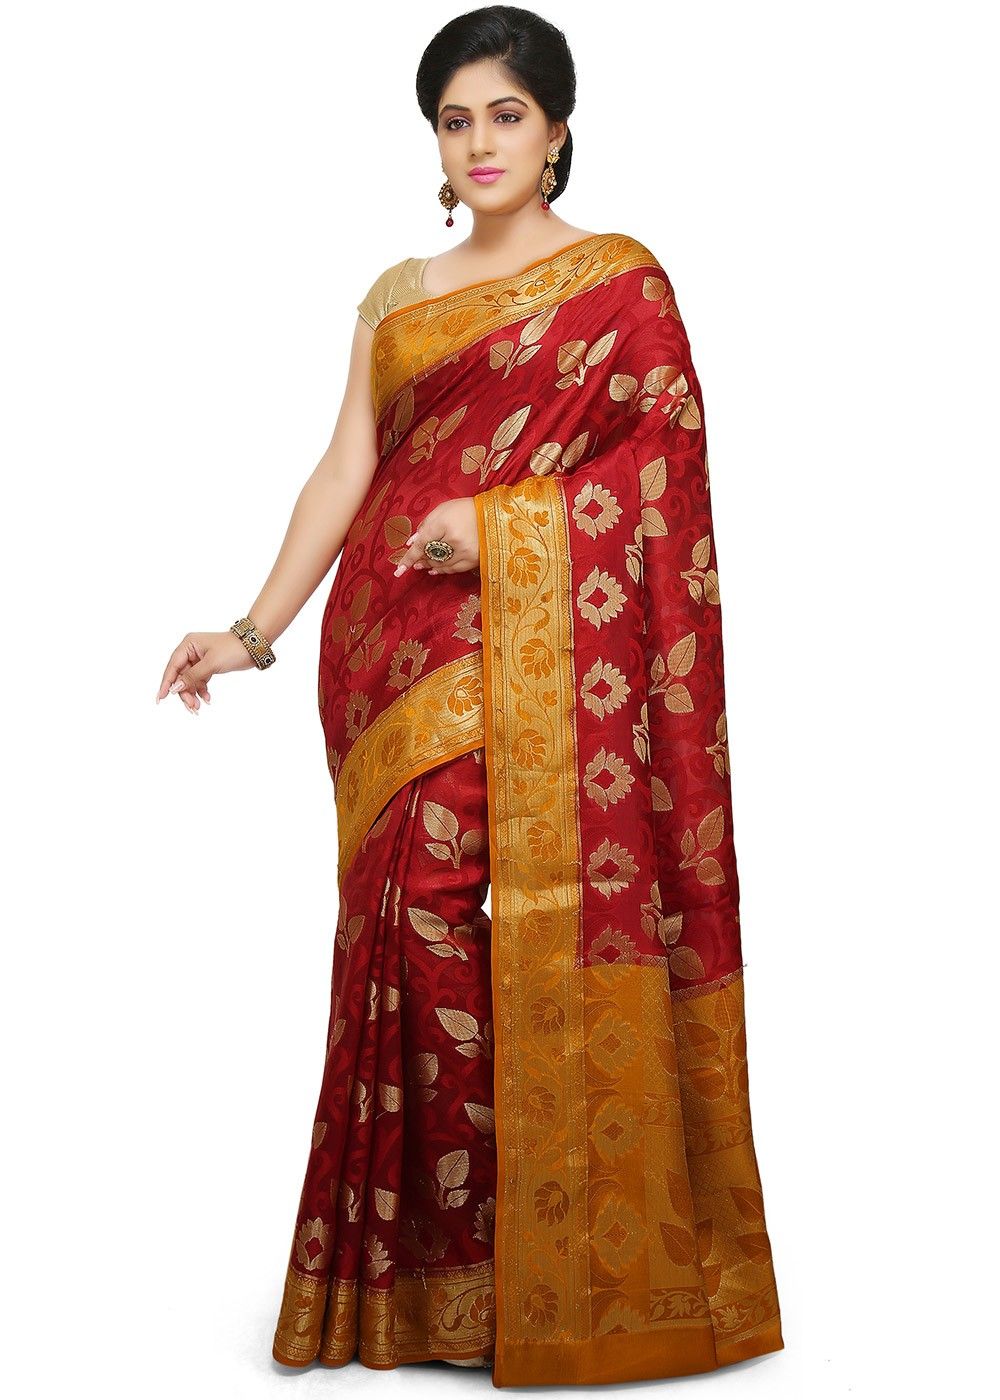 Aggregate more than 77 yellow maroon saree best